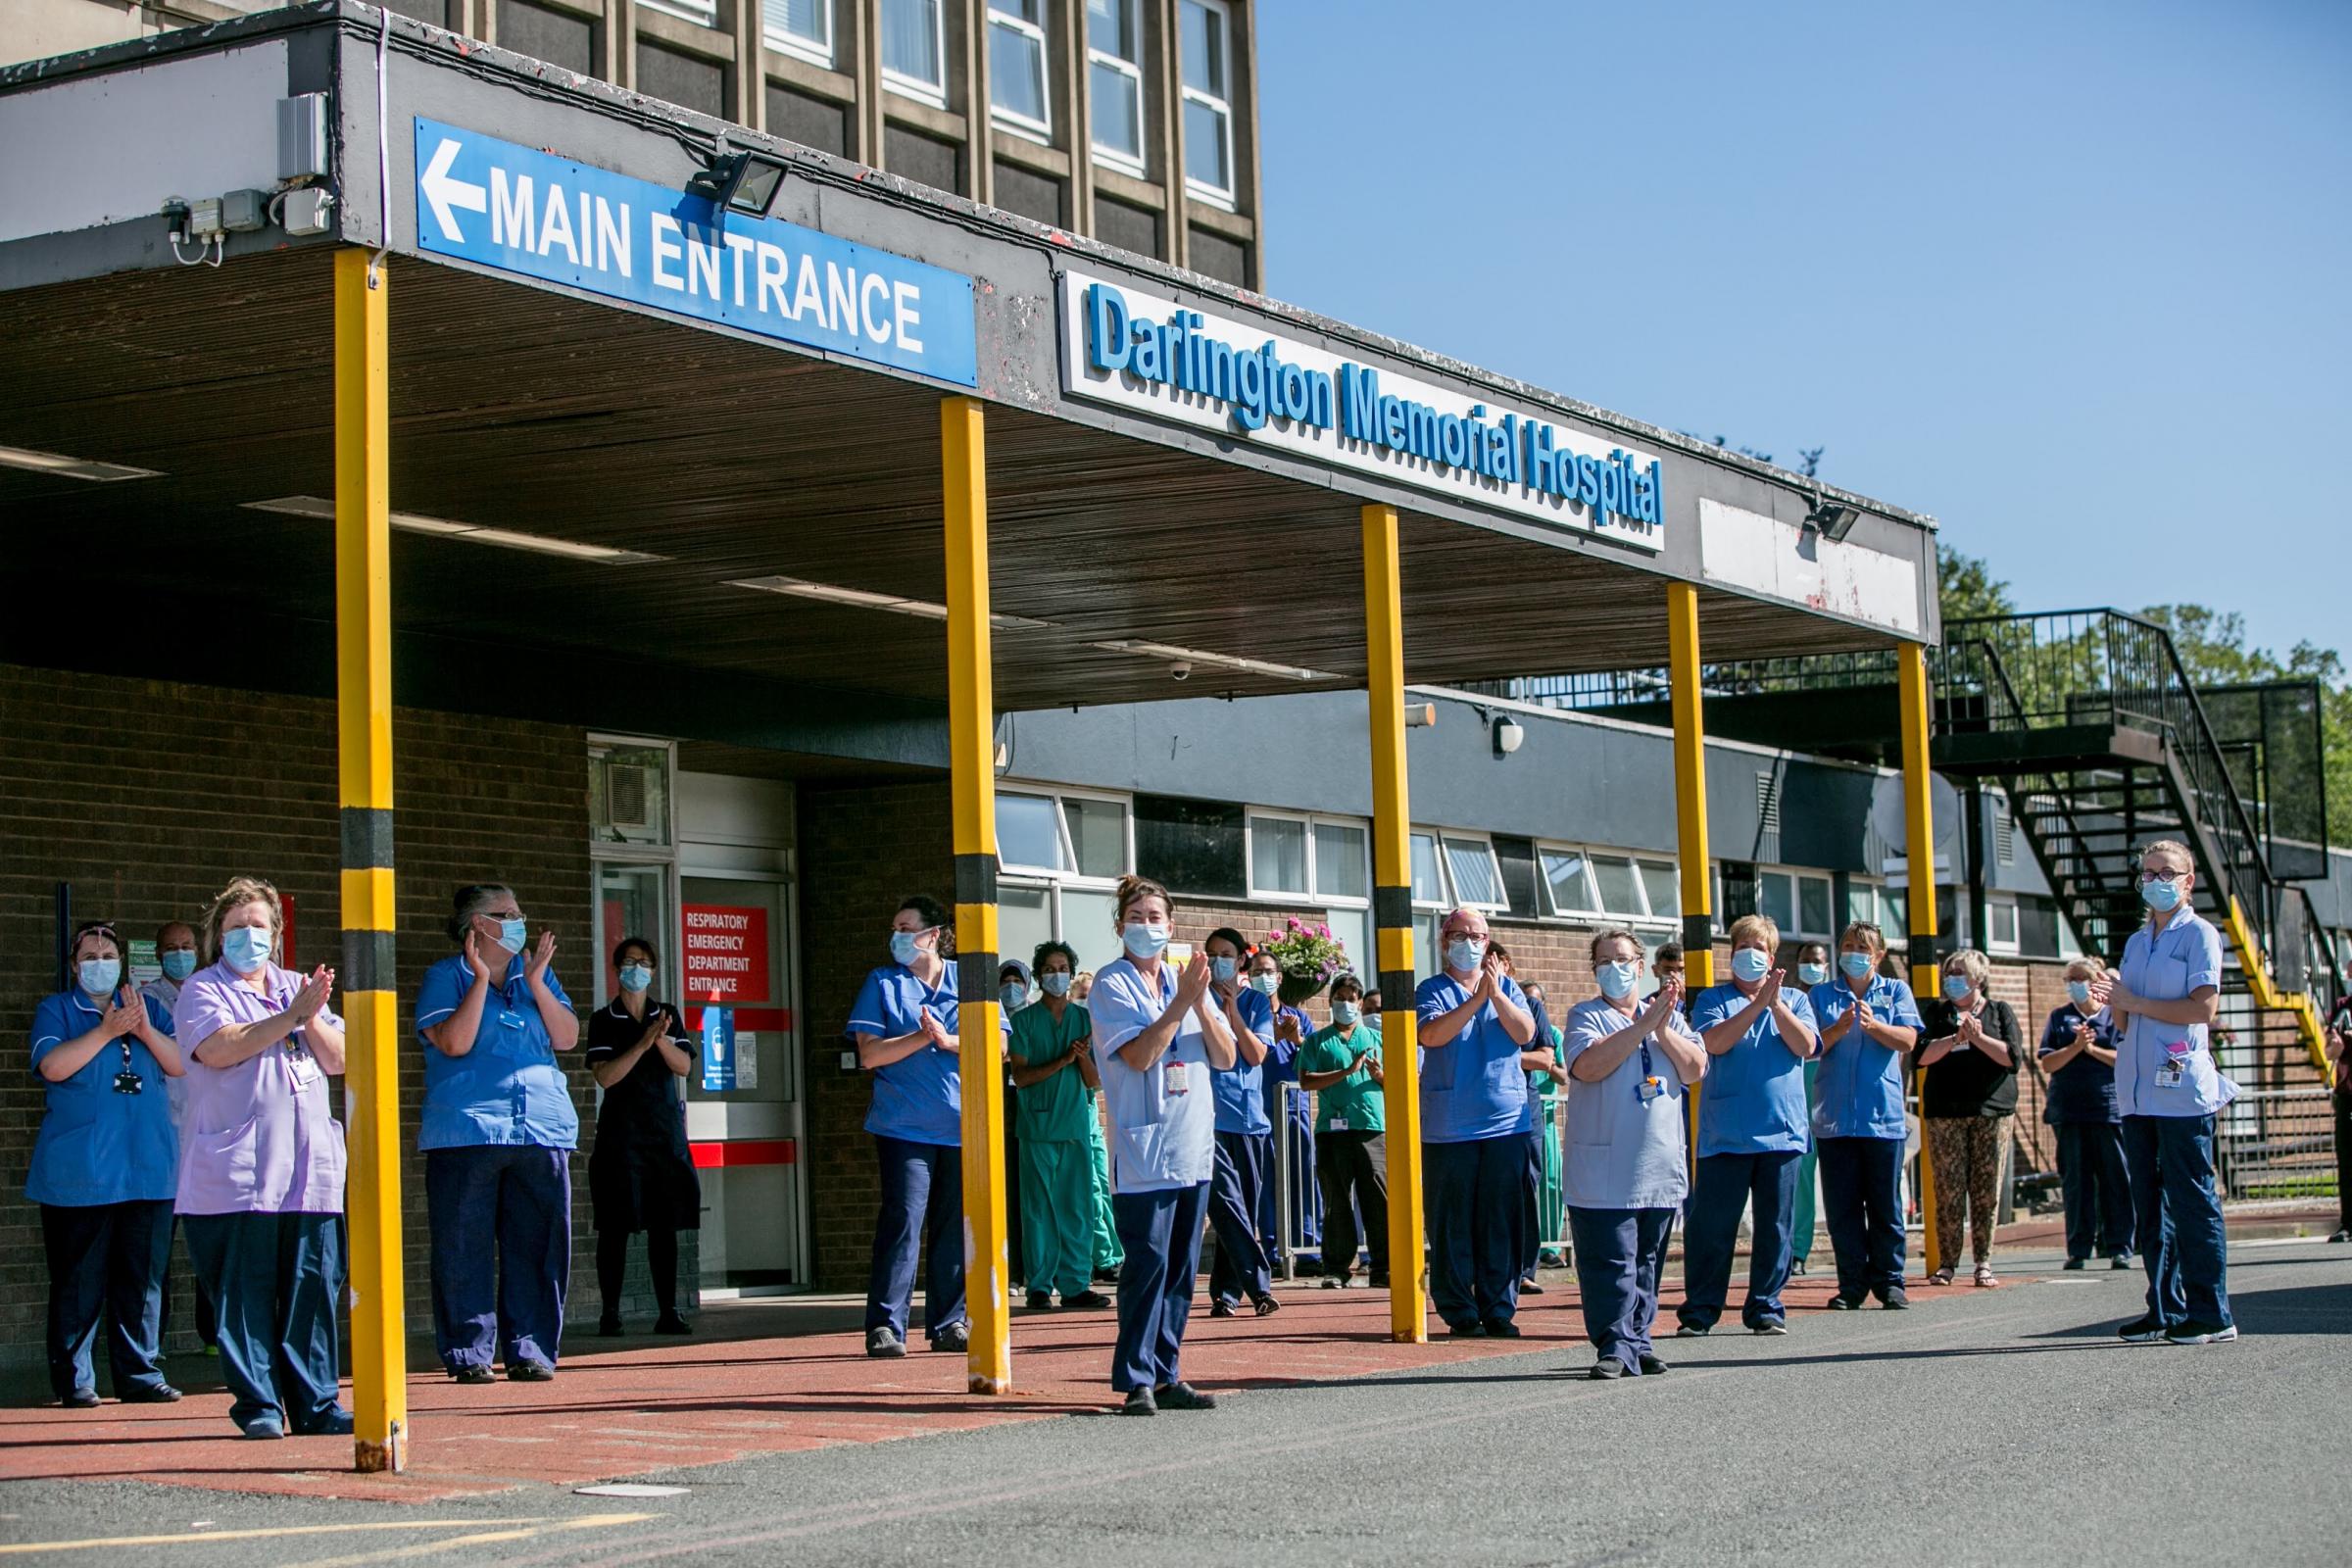 Darlington Memorial Hospital staff clapping for 72 years of the NHS 